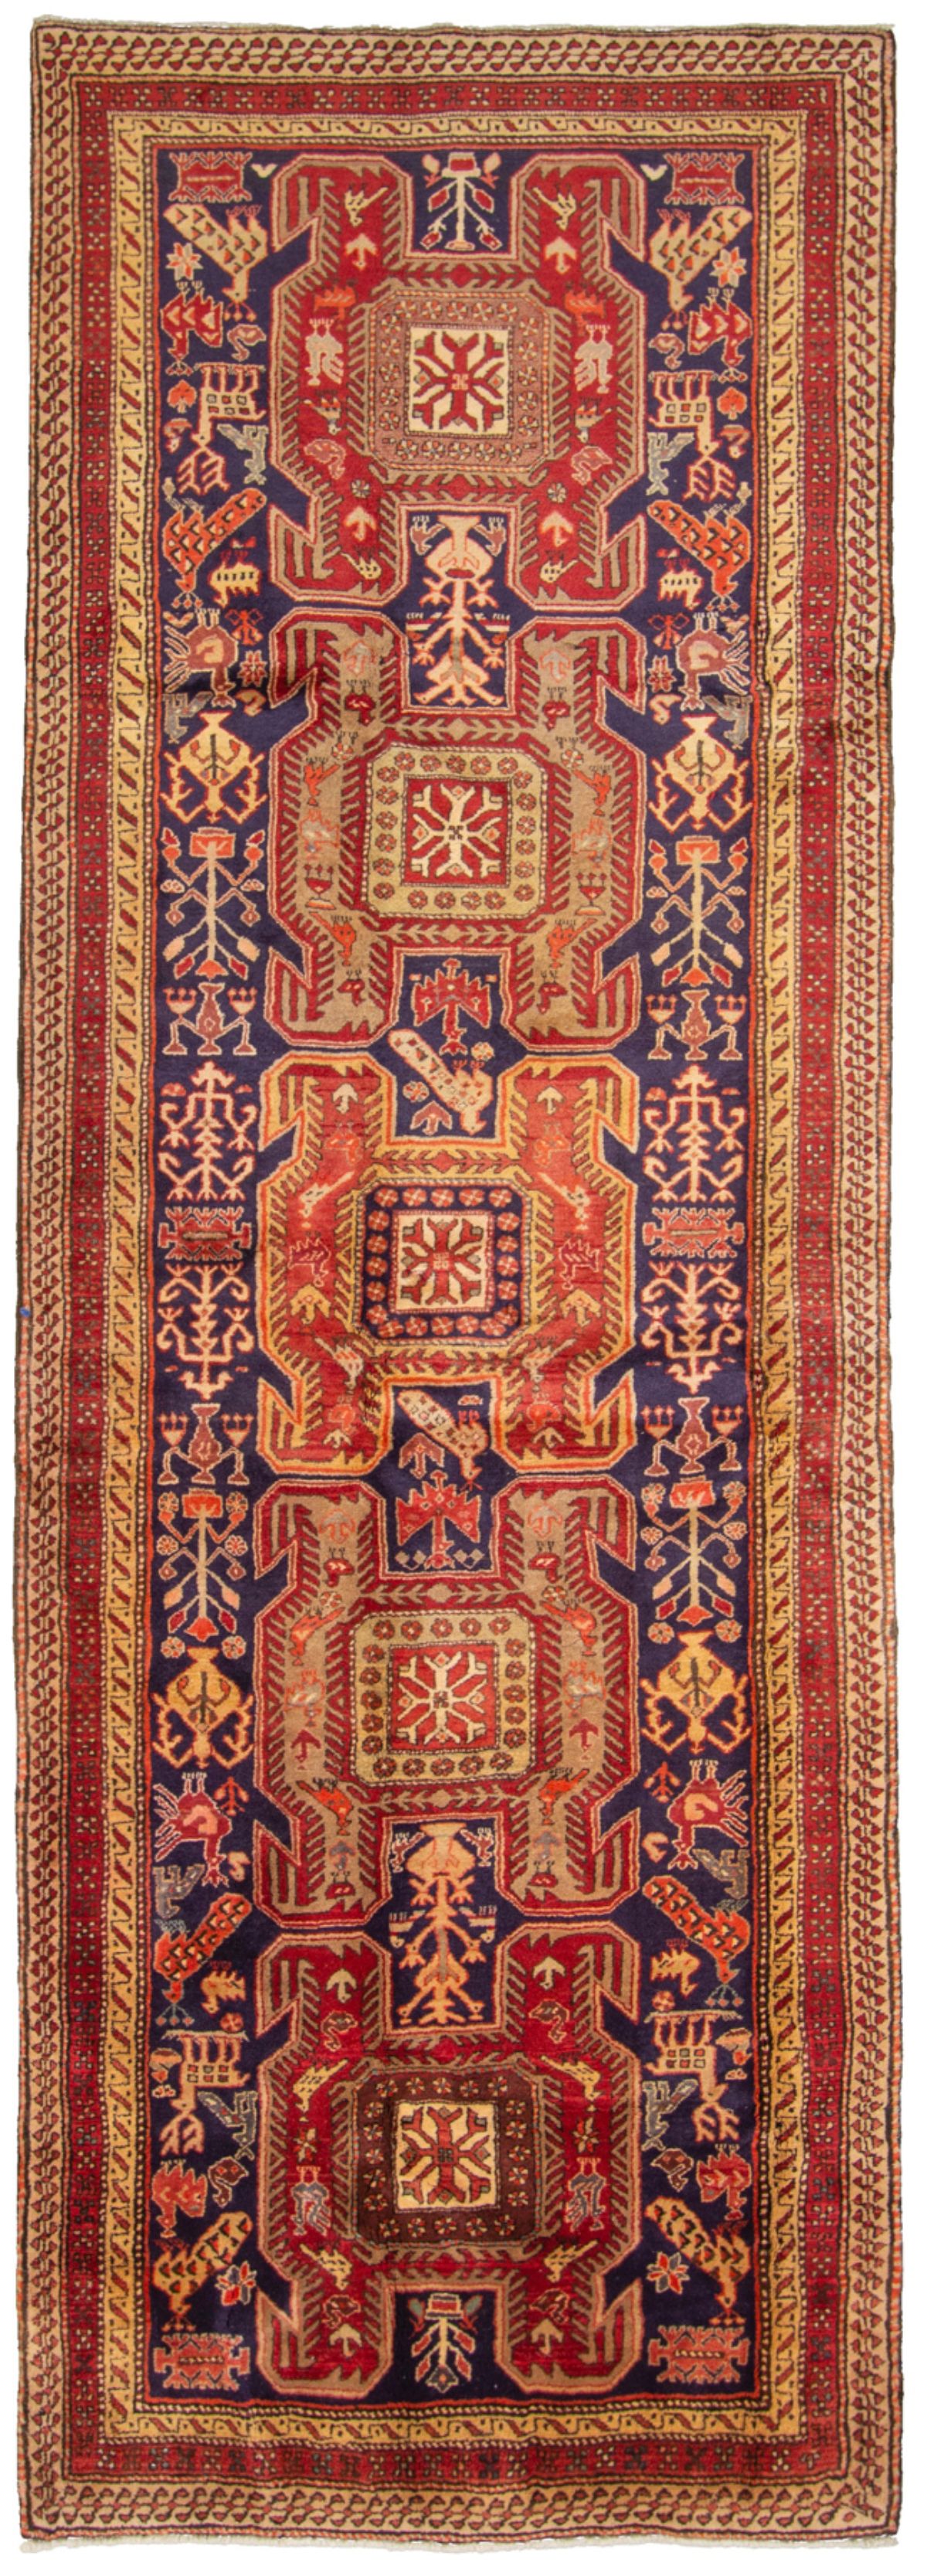 Hand-knotted Ardabil  Wool Rug 3'10" x 11'2" Size: 3'10" x 11'2"  